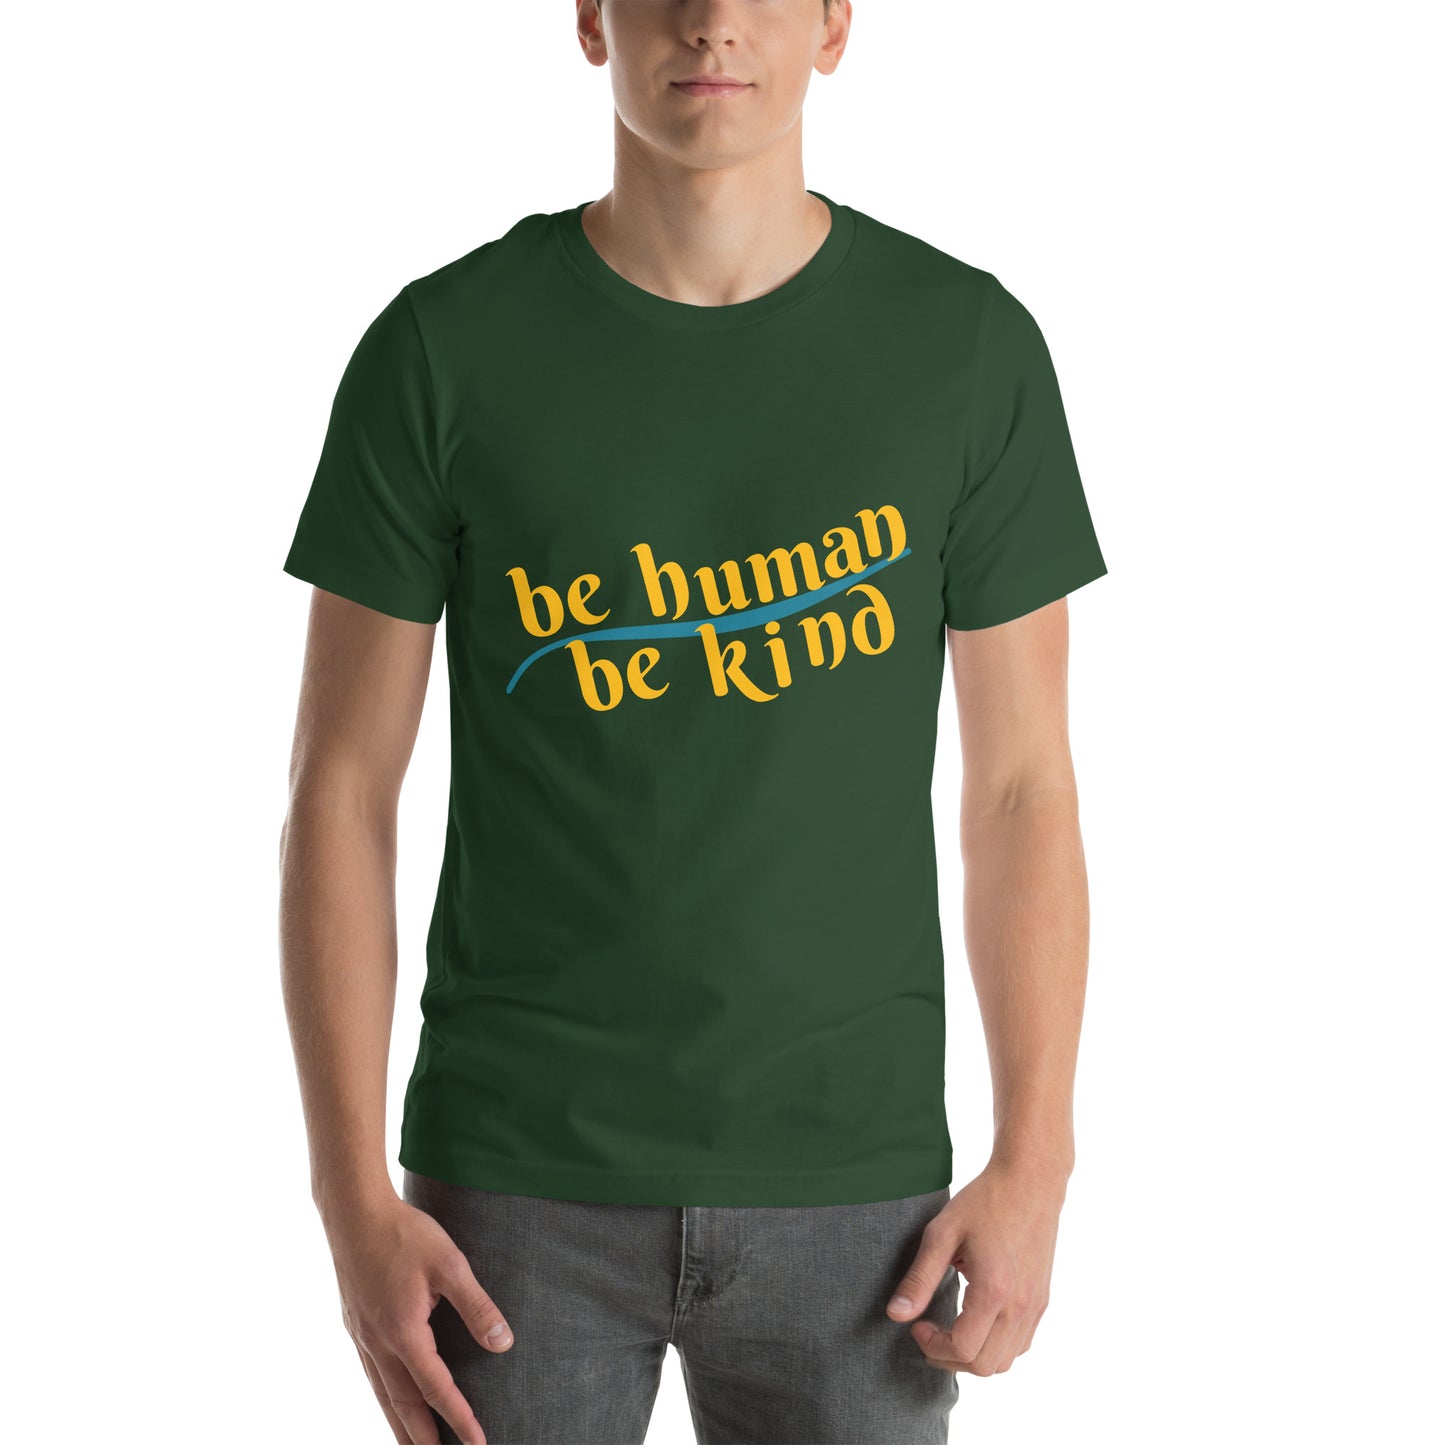 Be Human; Be Kind unisex t-shirt